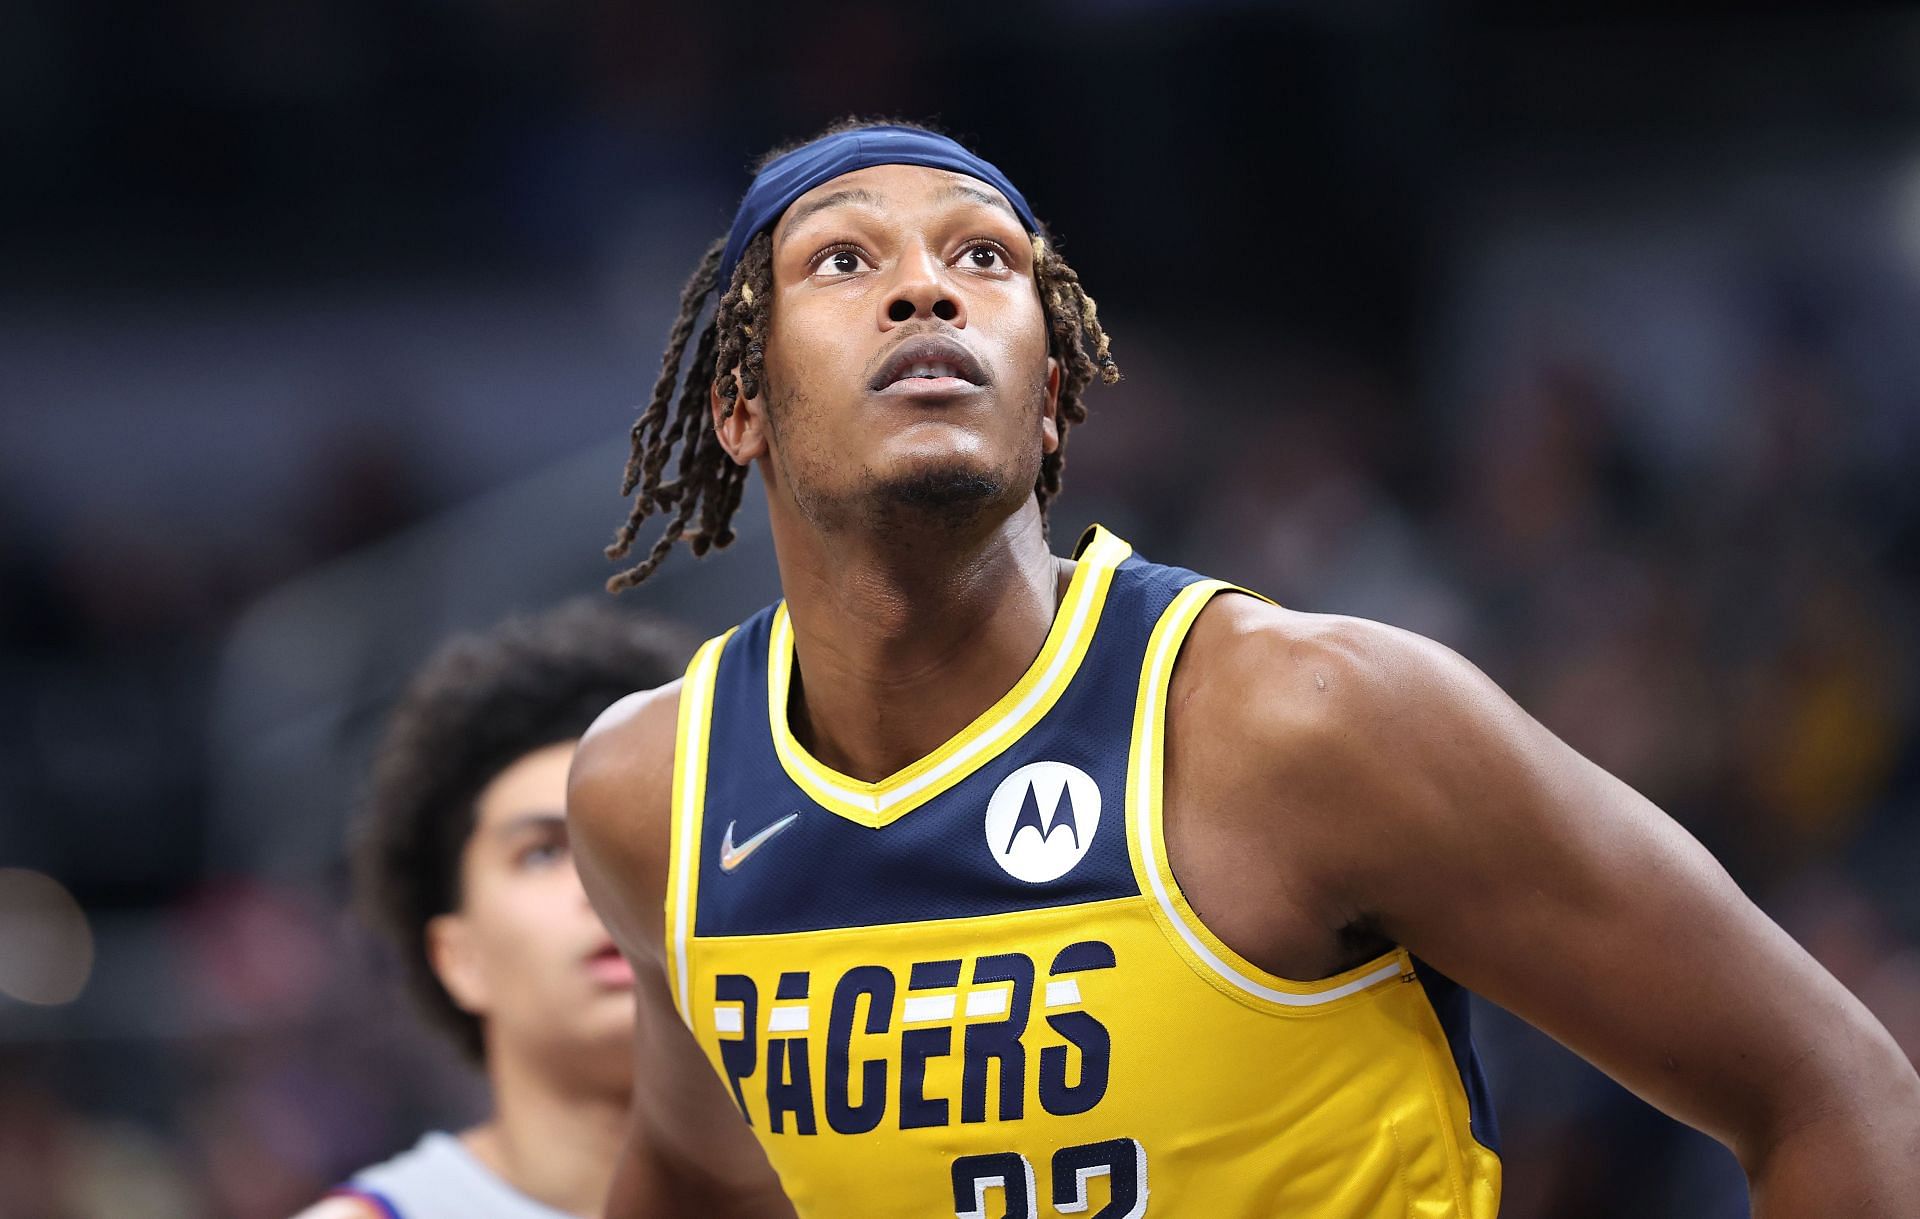 Myles Turner would be a great acquisition by the Lakers.